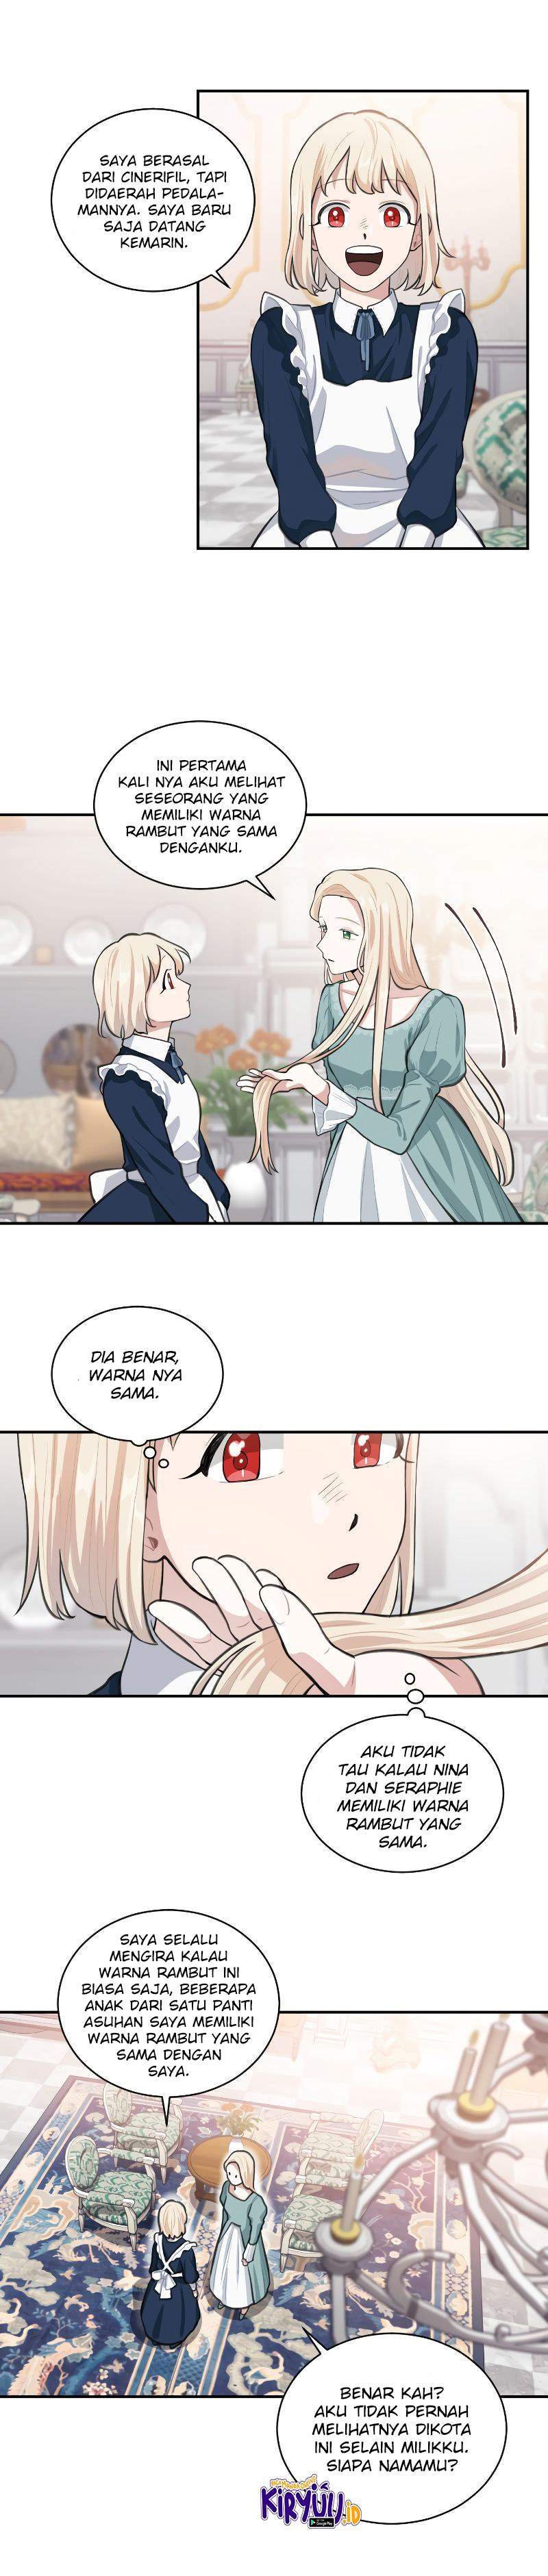 I Became a Maid in a TL Novel Chapter 3 22